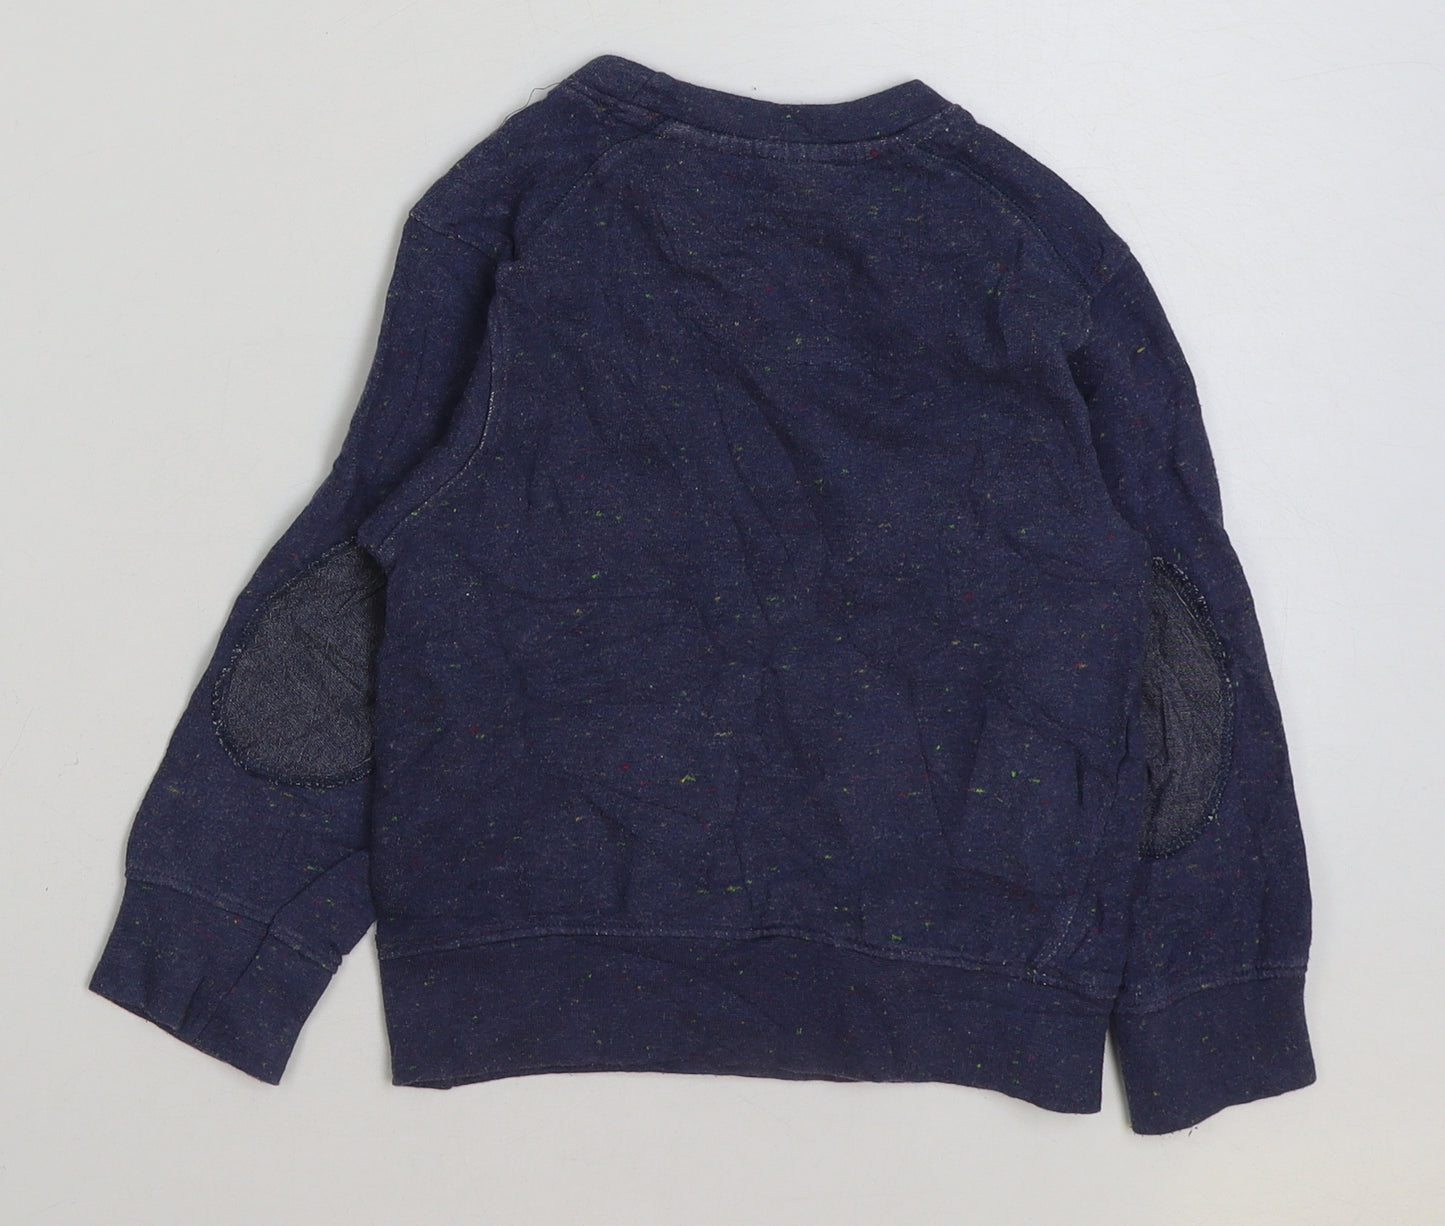 Primark Boys Blue Polyester Pullover Sweatshirt Size 4-5 Years Pullover